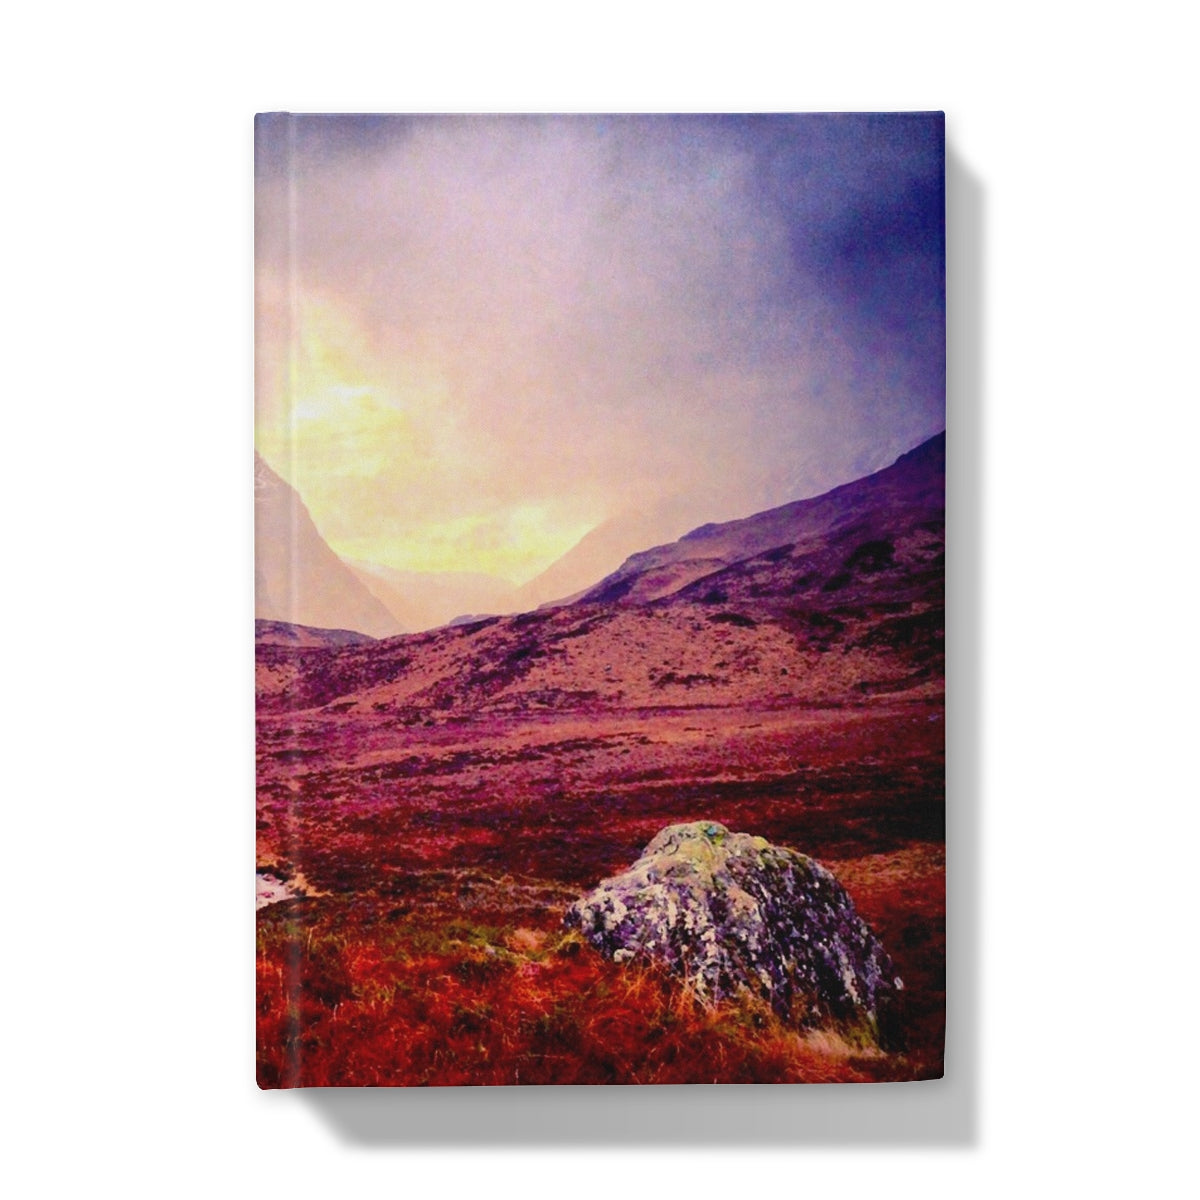 A Brooding Glencoe Art Gifts Hardback Journal-Journals & Notebooks-Glencoe Art Gallery-A5-Lined-Paintings, Prints, Homeware, Art Gifts From Scotland By Scottish Artist Kevin Hunter